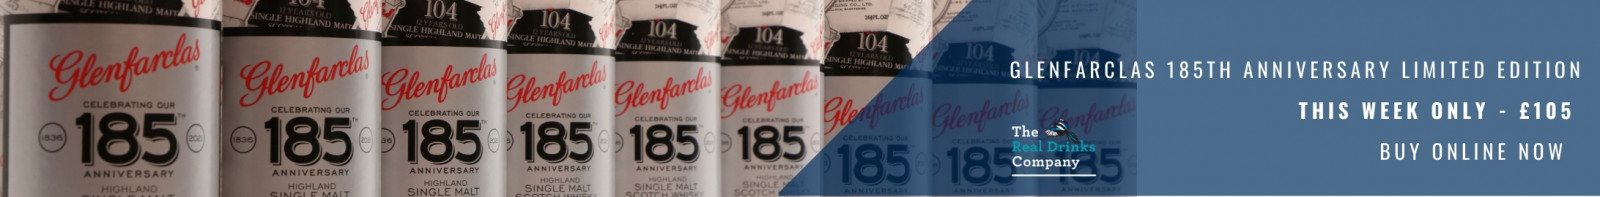 Buy Glenfarclas 185th Anniversary bottle from The Real Drinks Company